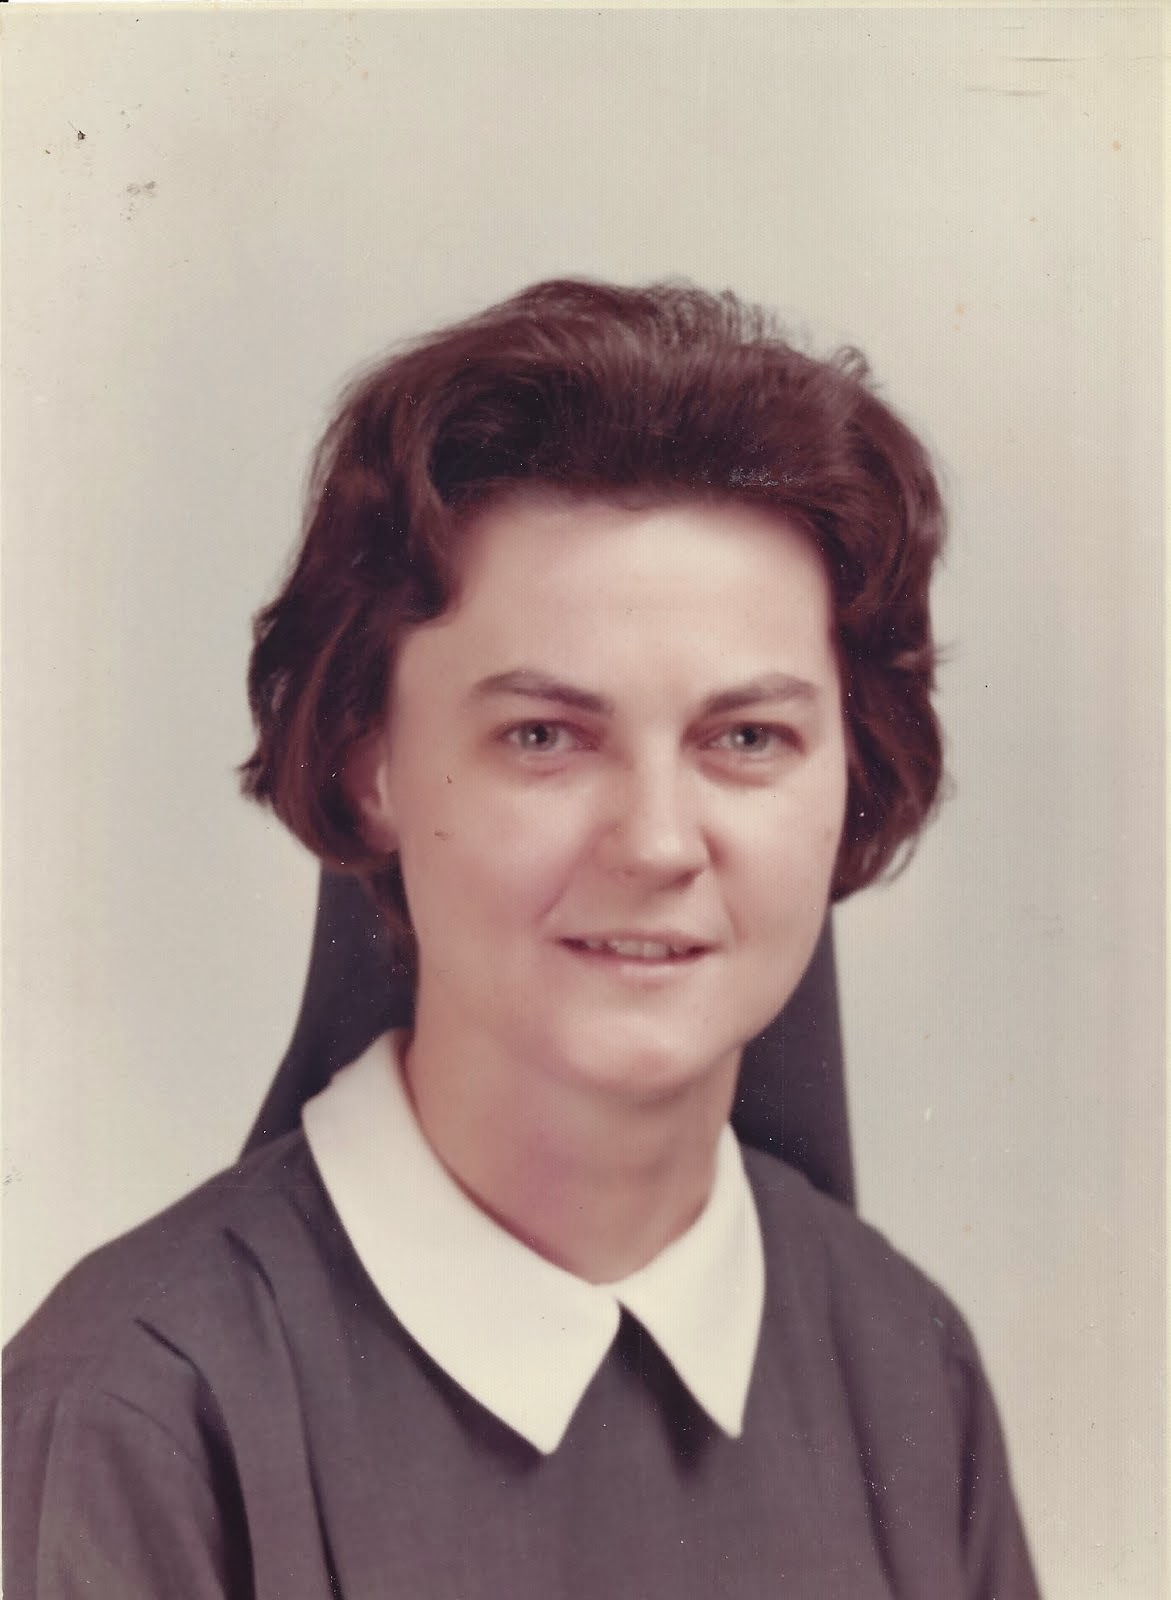 Your Great aunt Audrey as a young nun